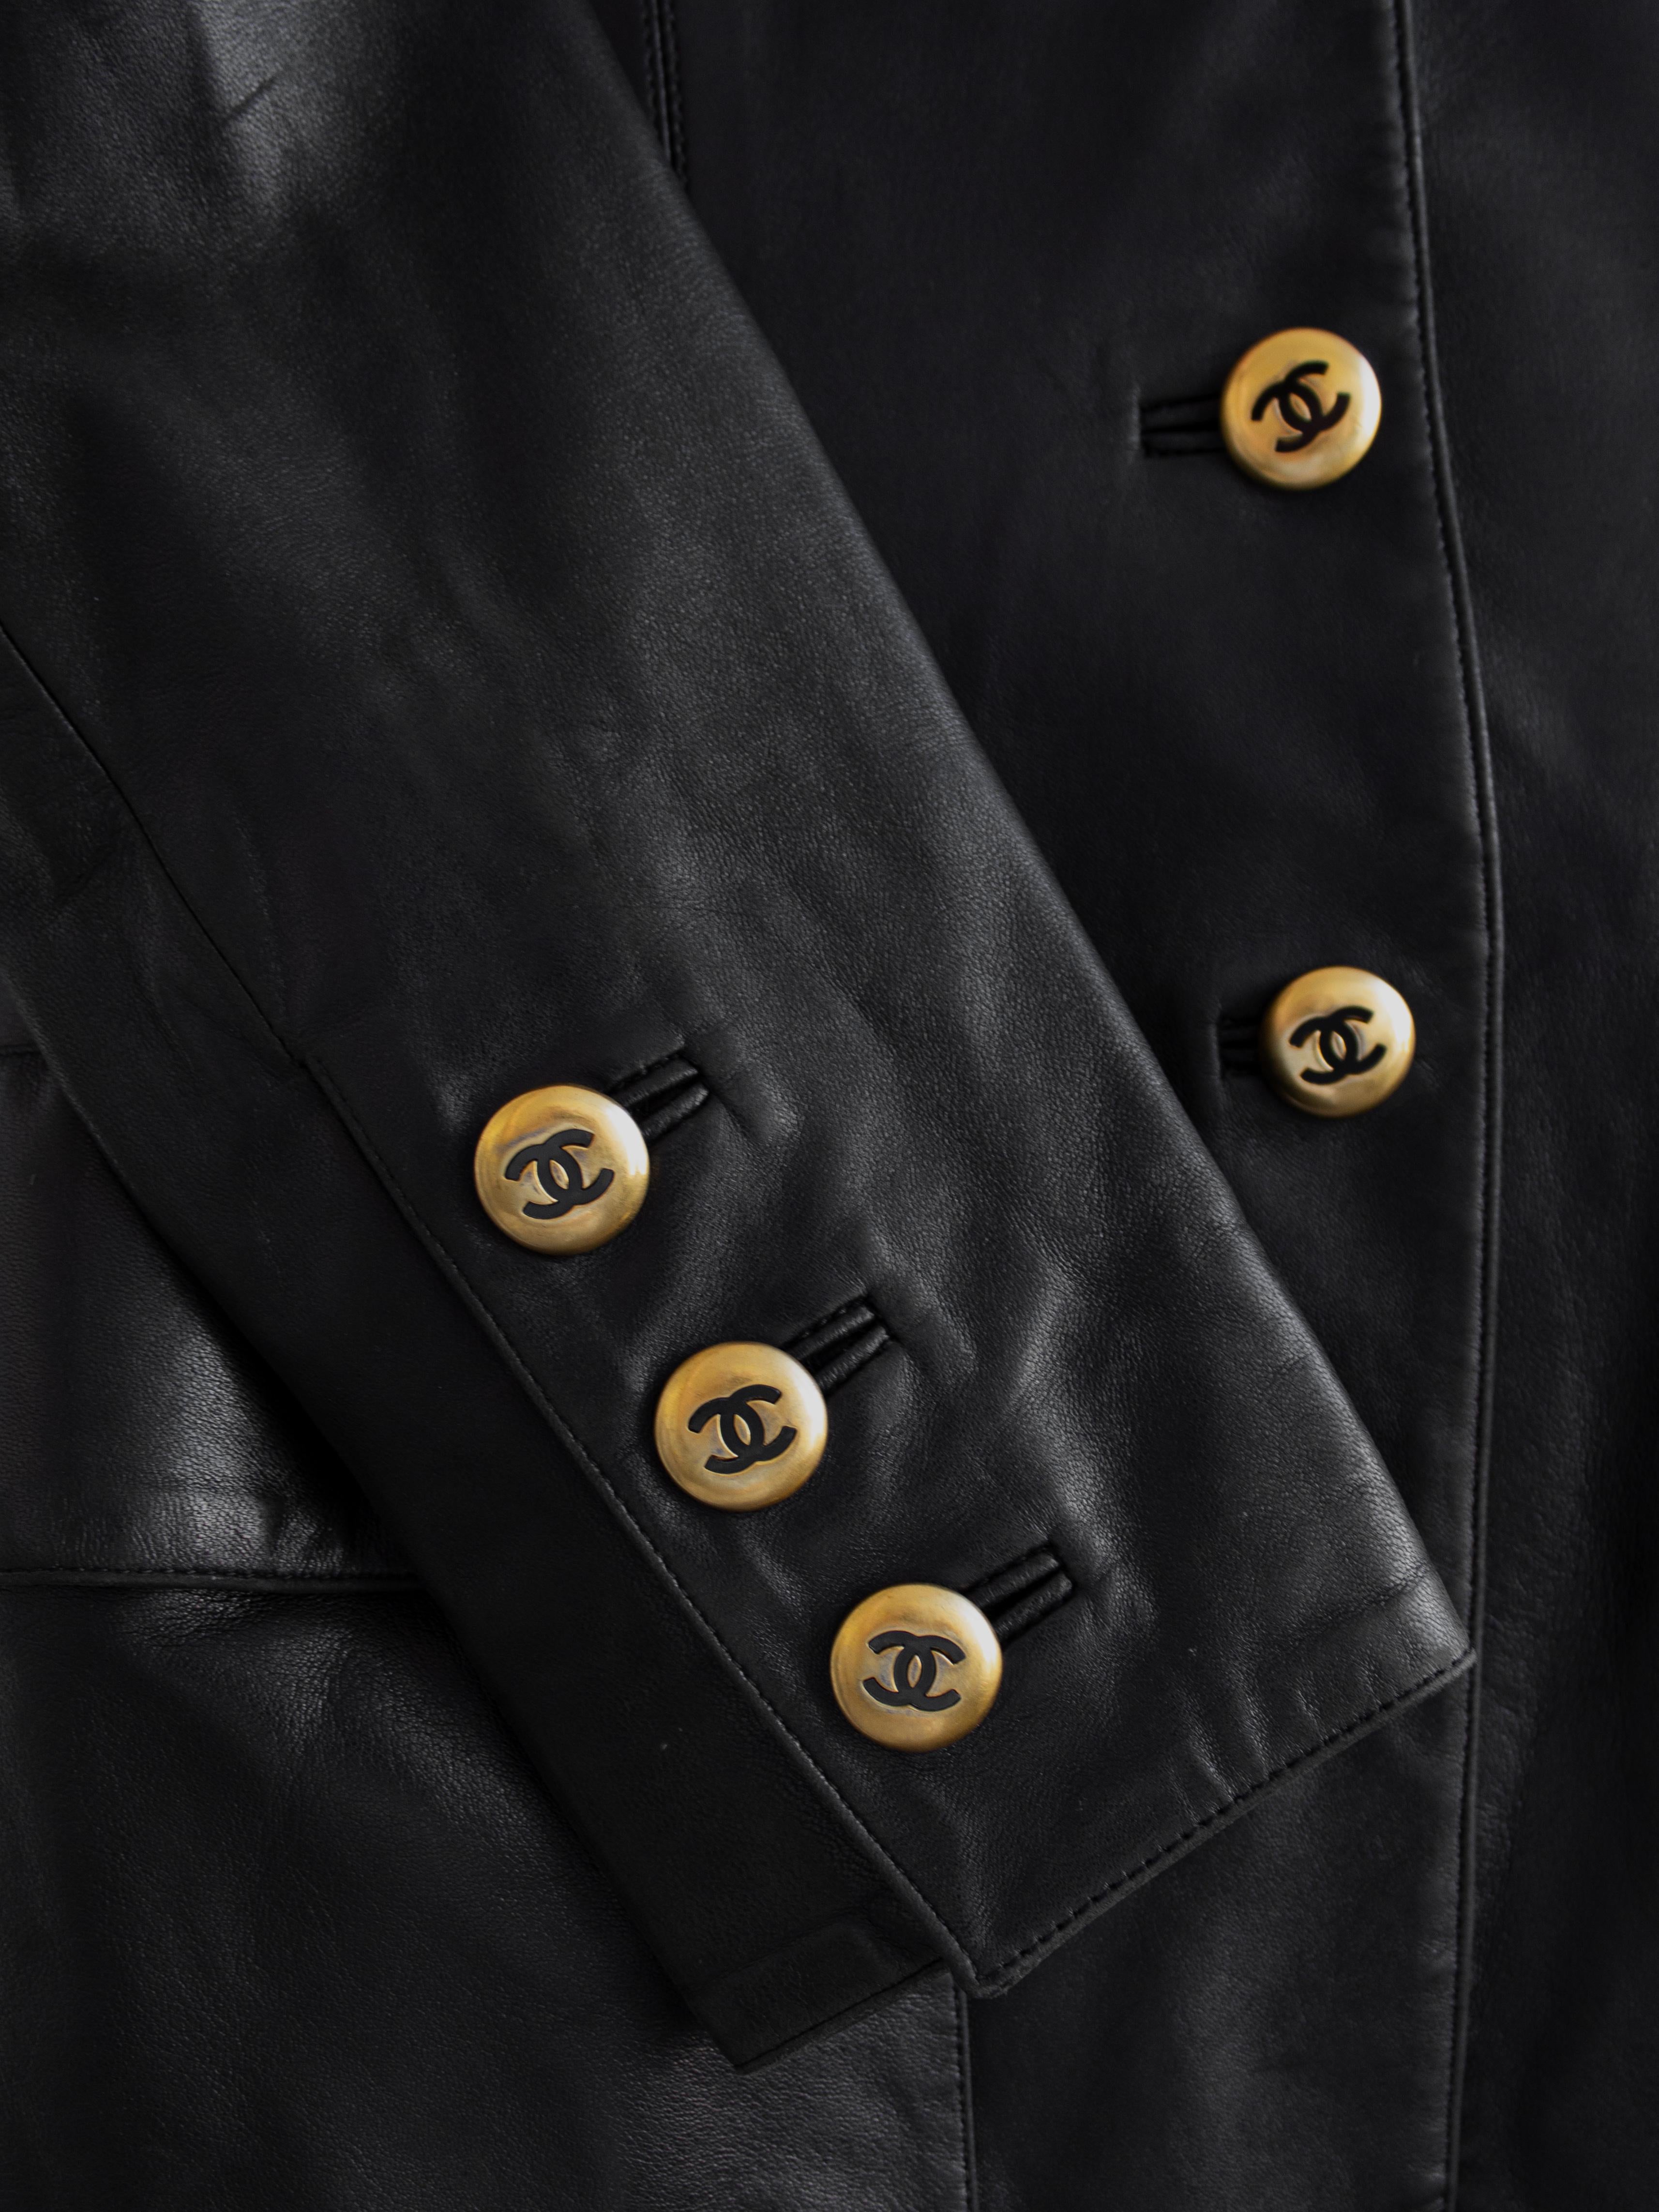 Iconic Chanel Vintage F/W 1992 Black Gold CC Lambskin Leather Suede Jacket 9